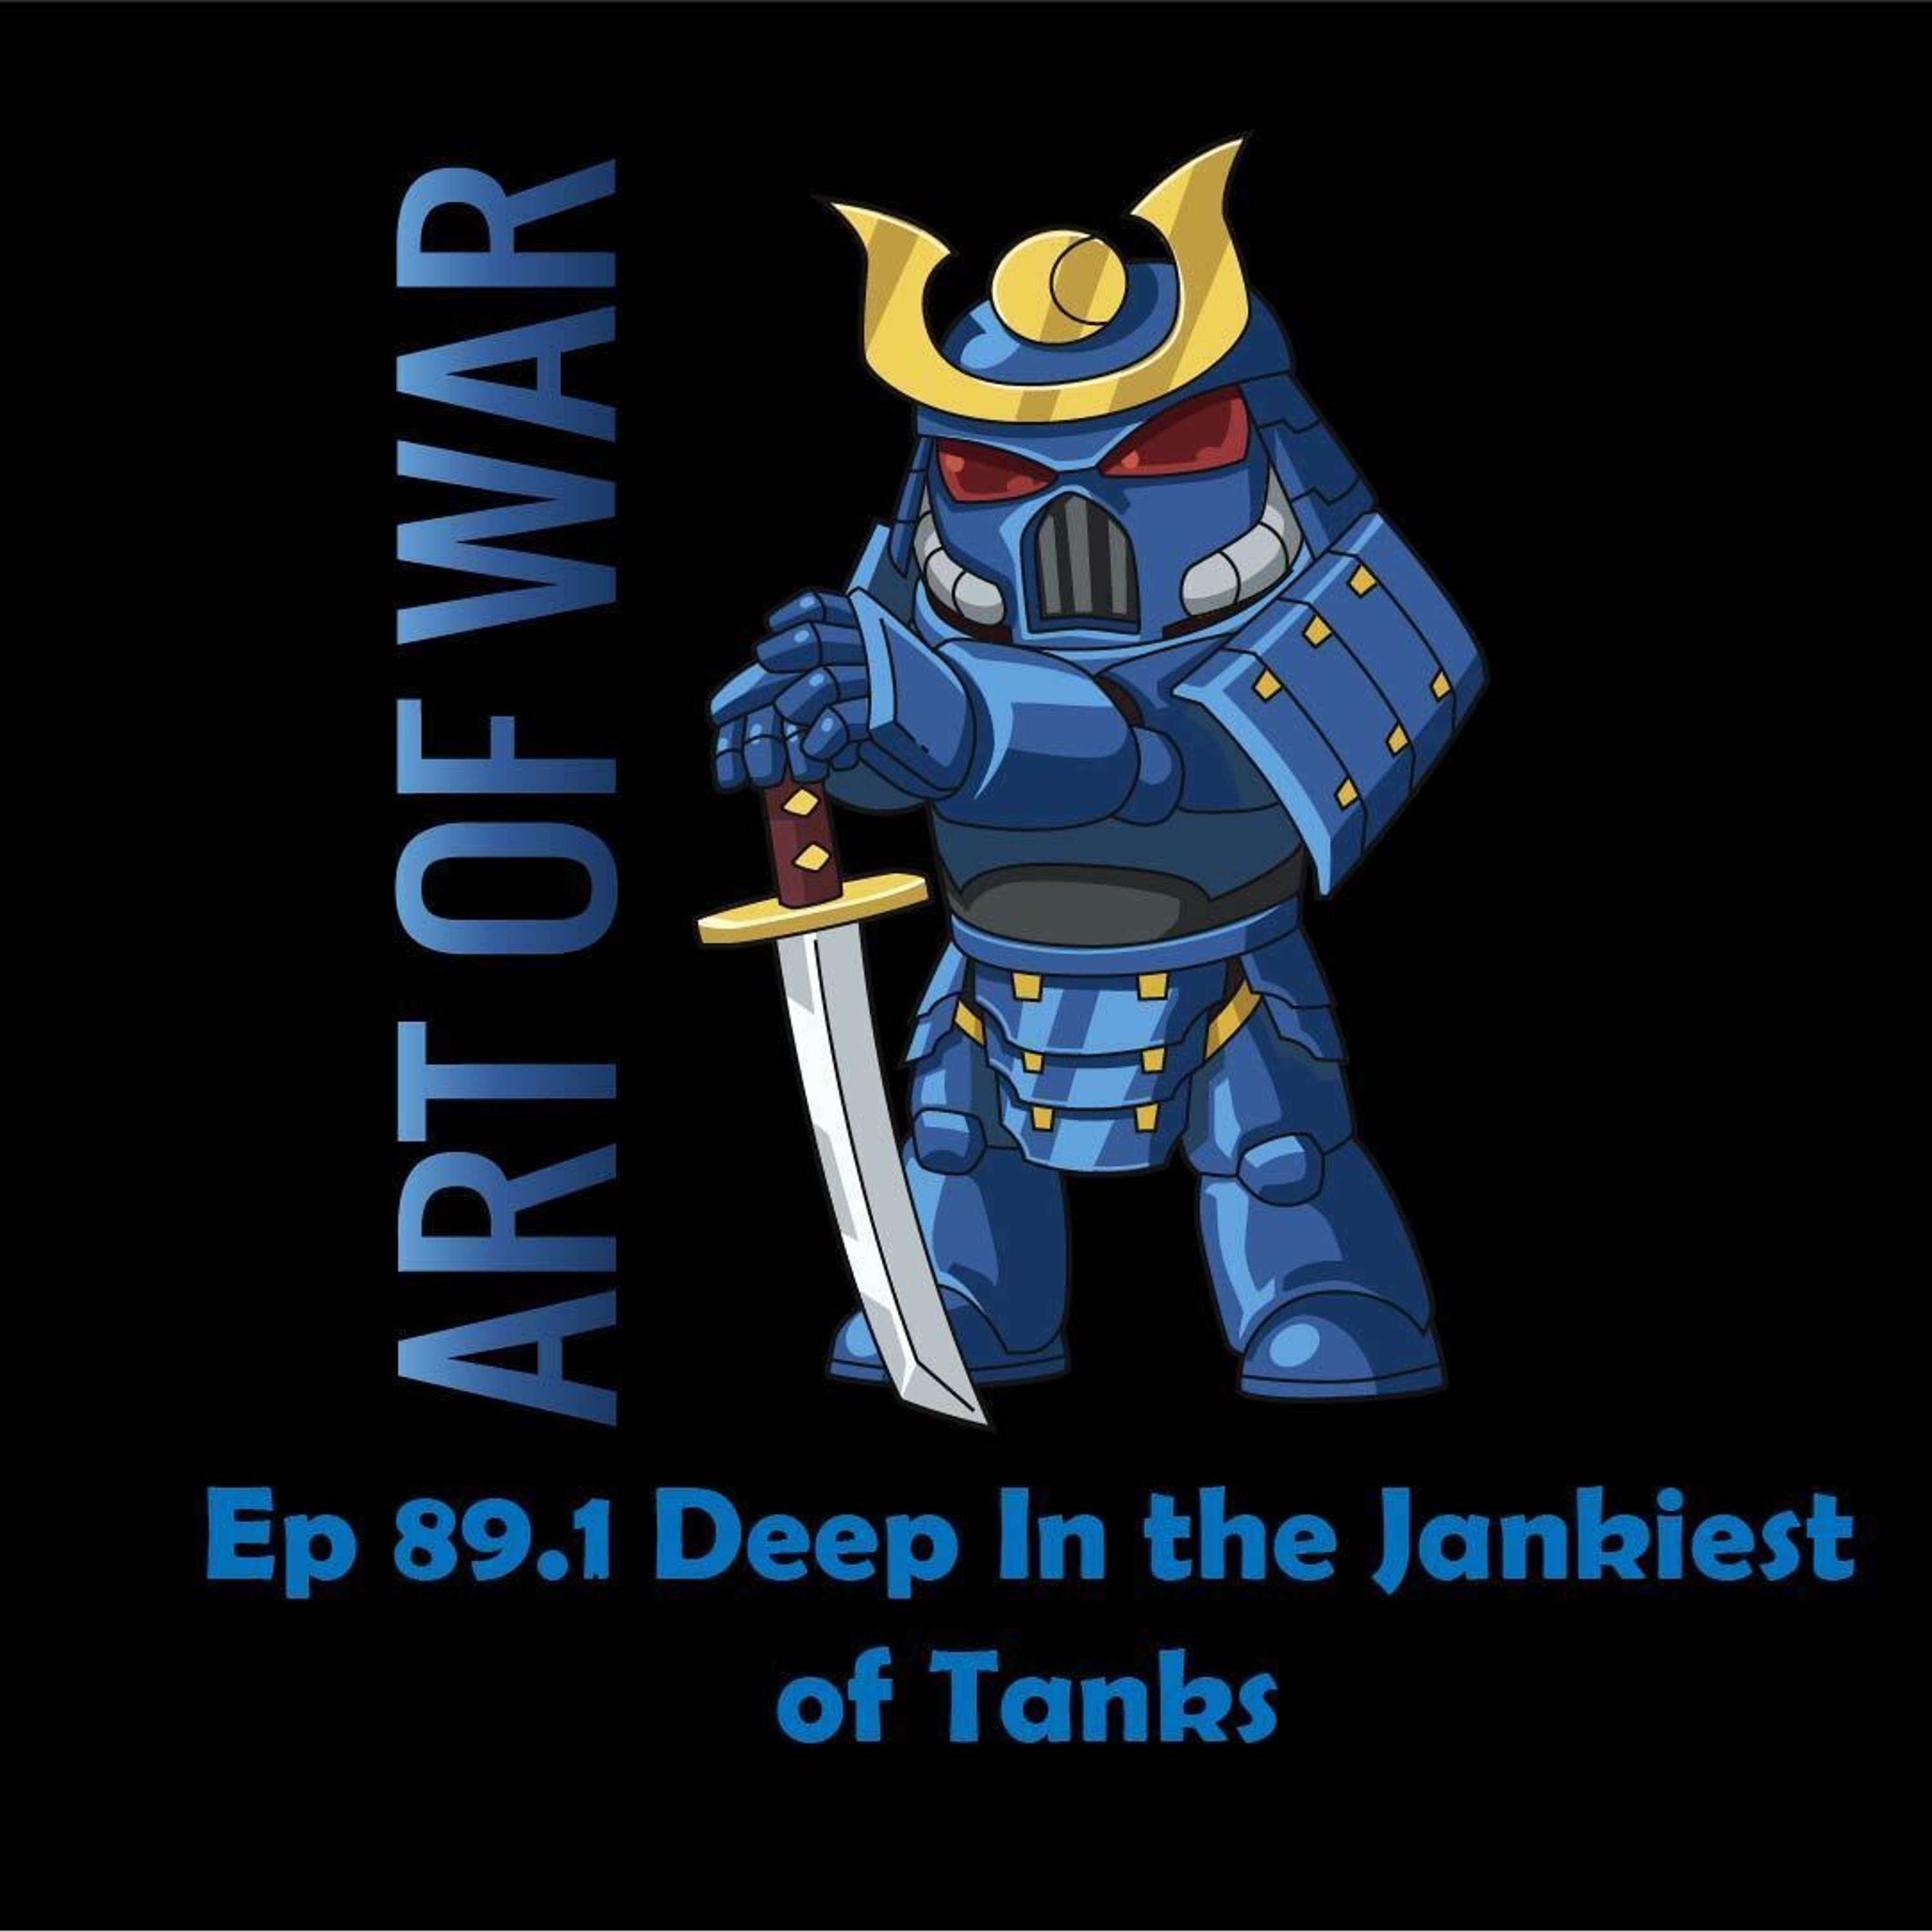 AOW Ep. 89.1 Deep in the Jankiest of Tanks